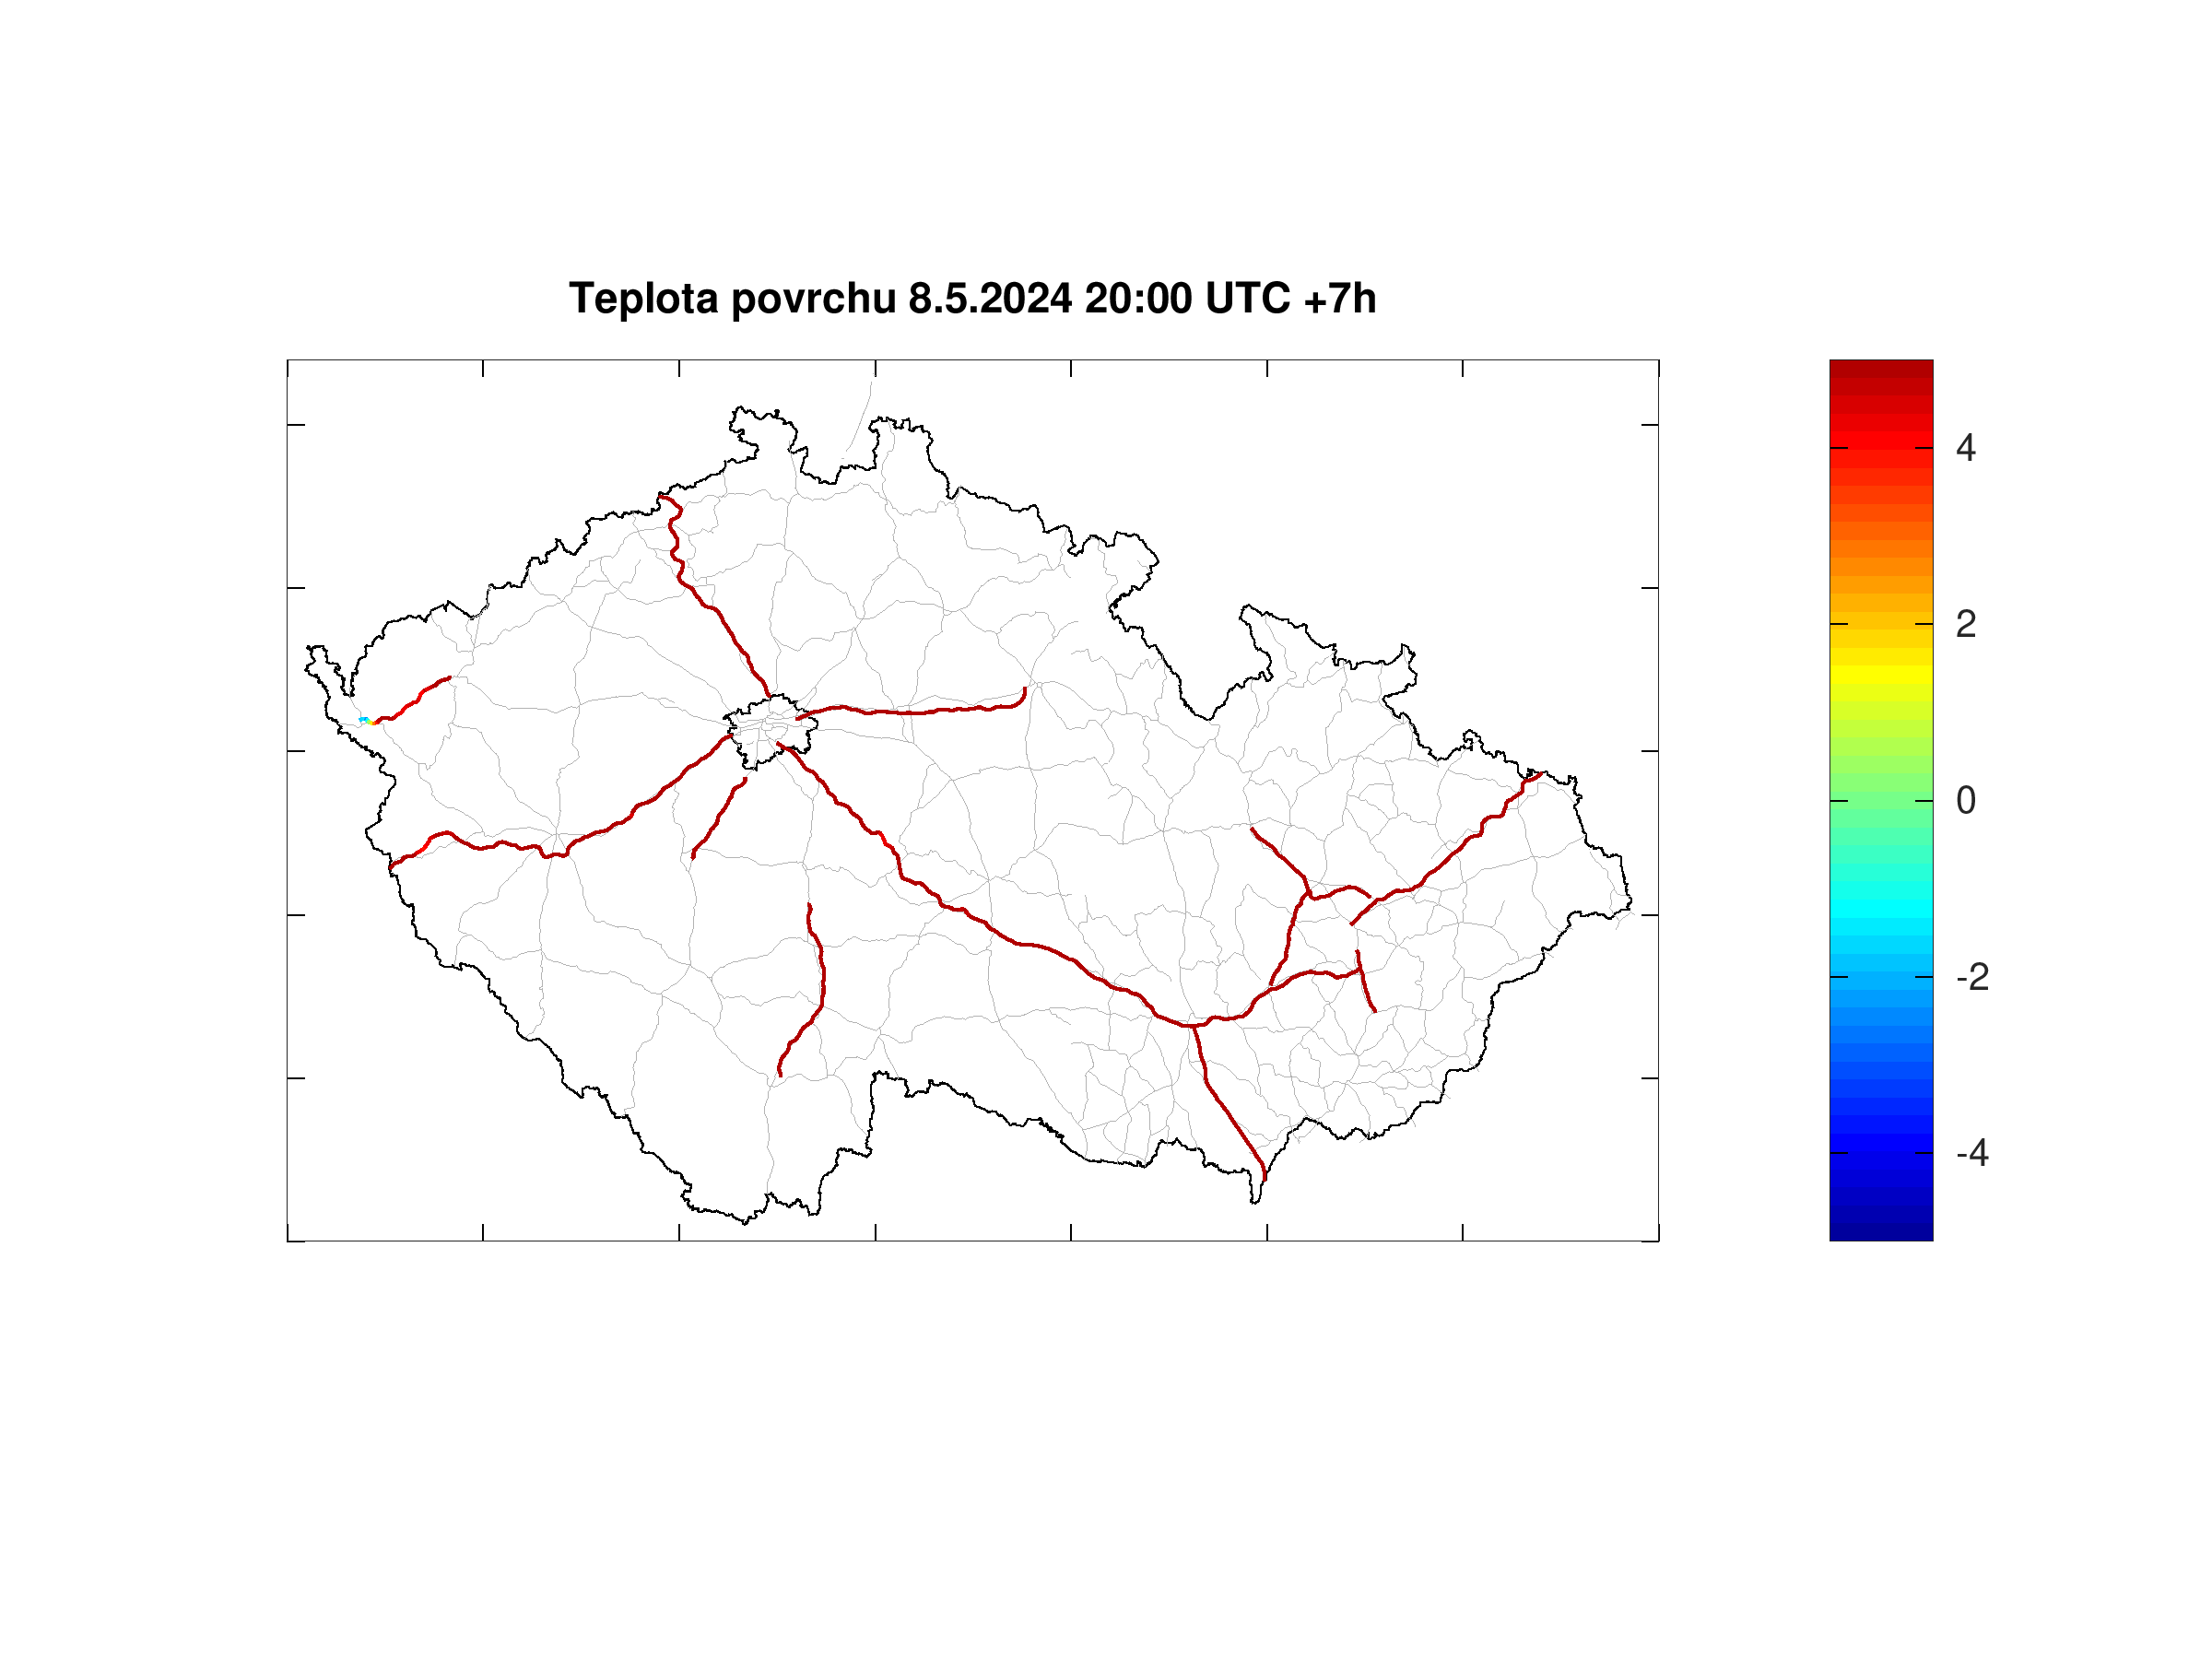 Road surface teperature forecast for Czech highways +7h